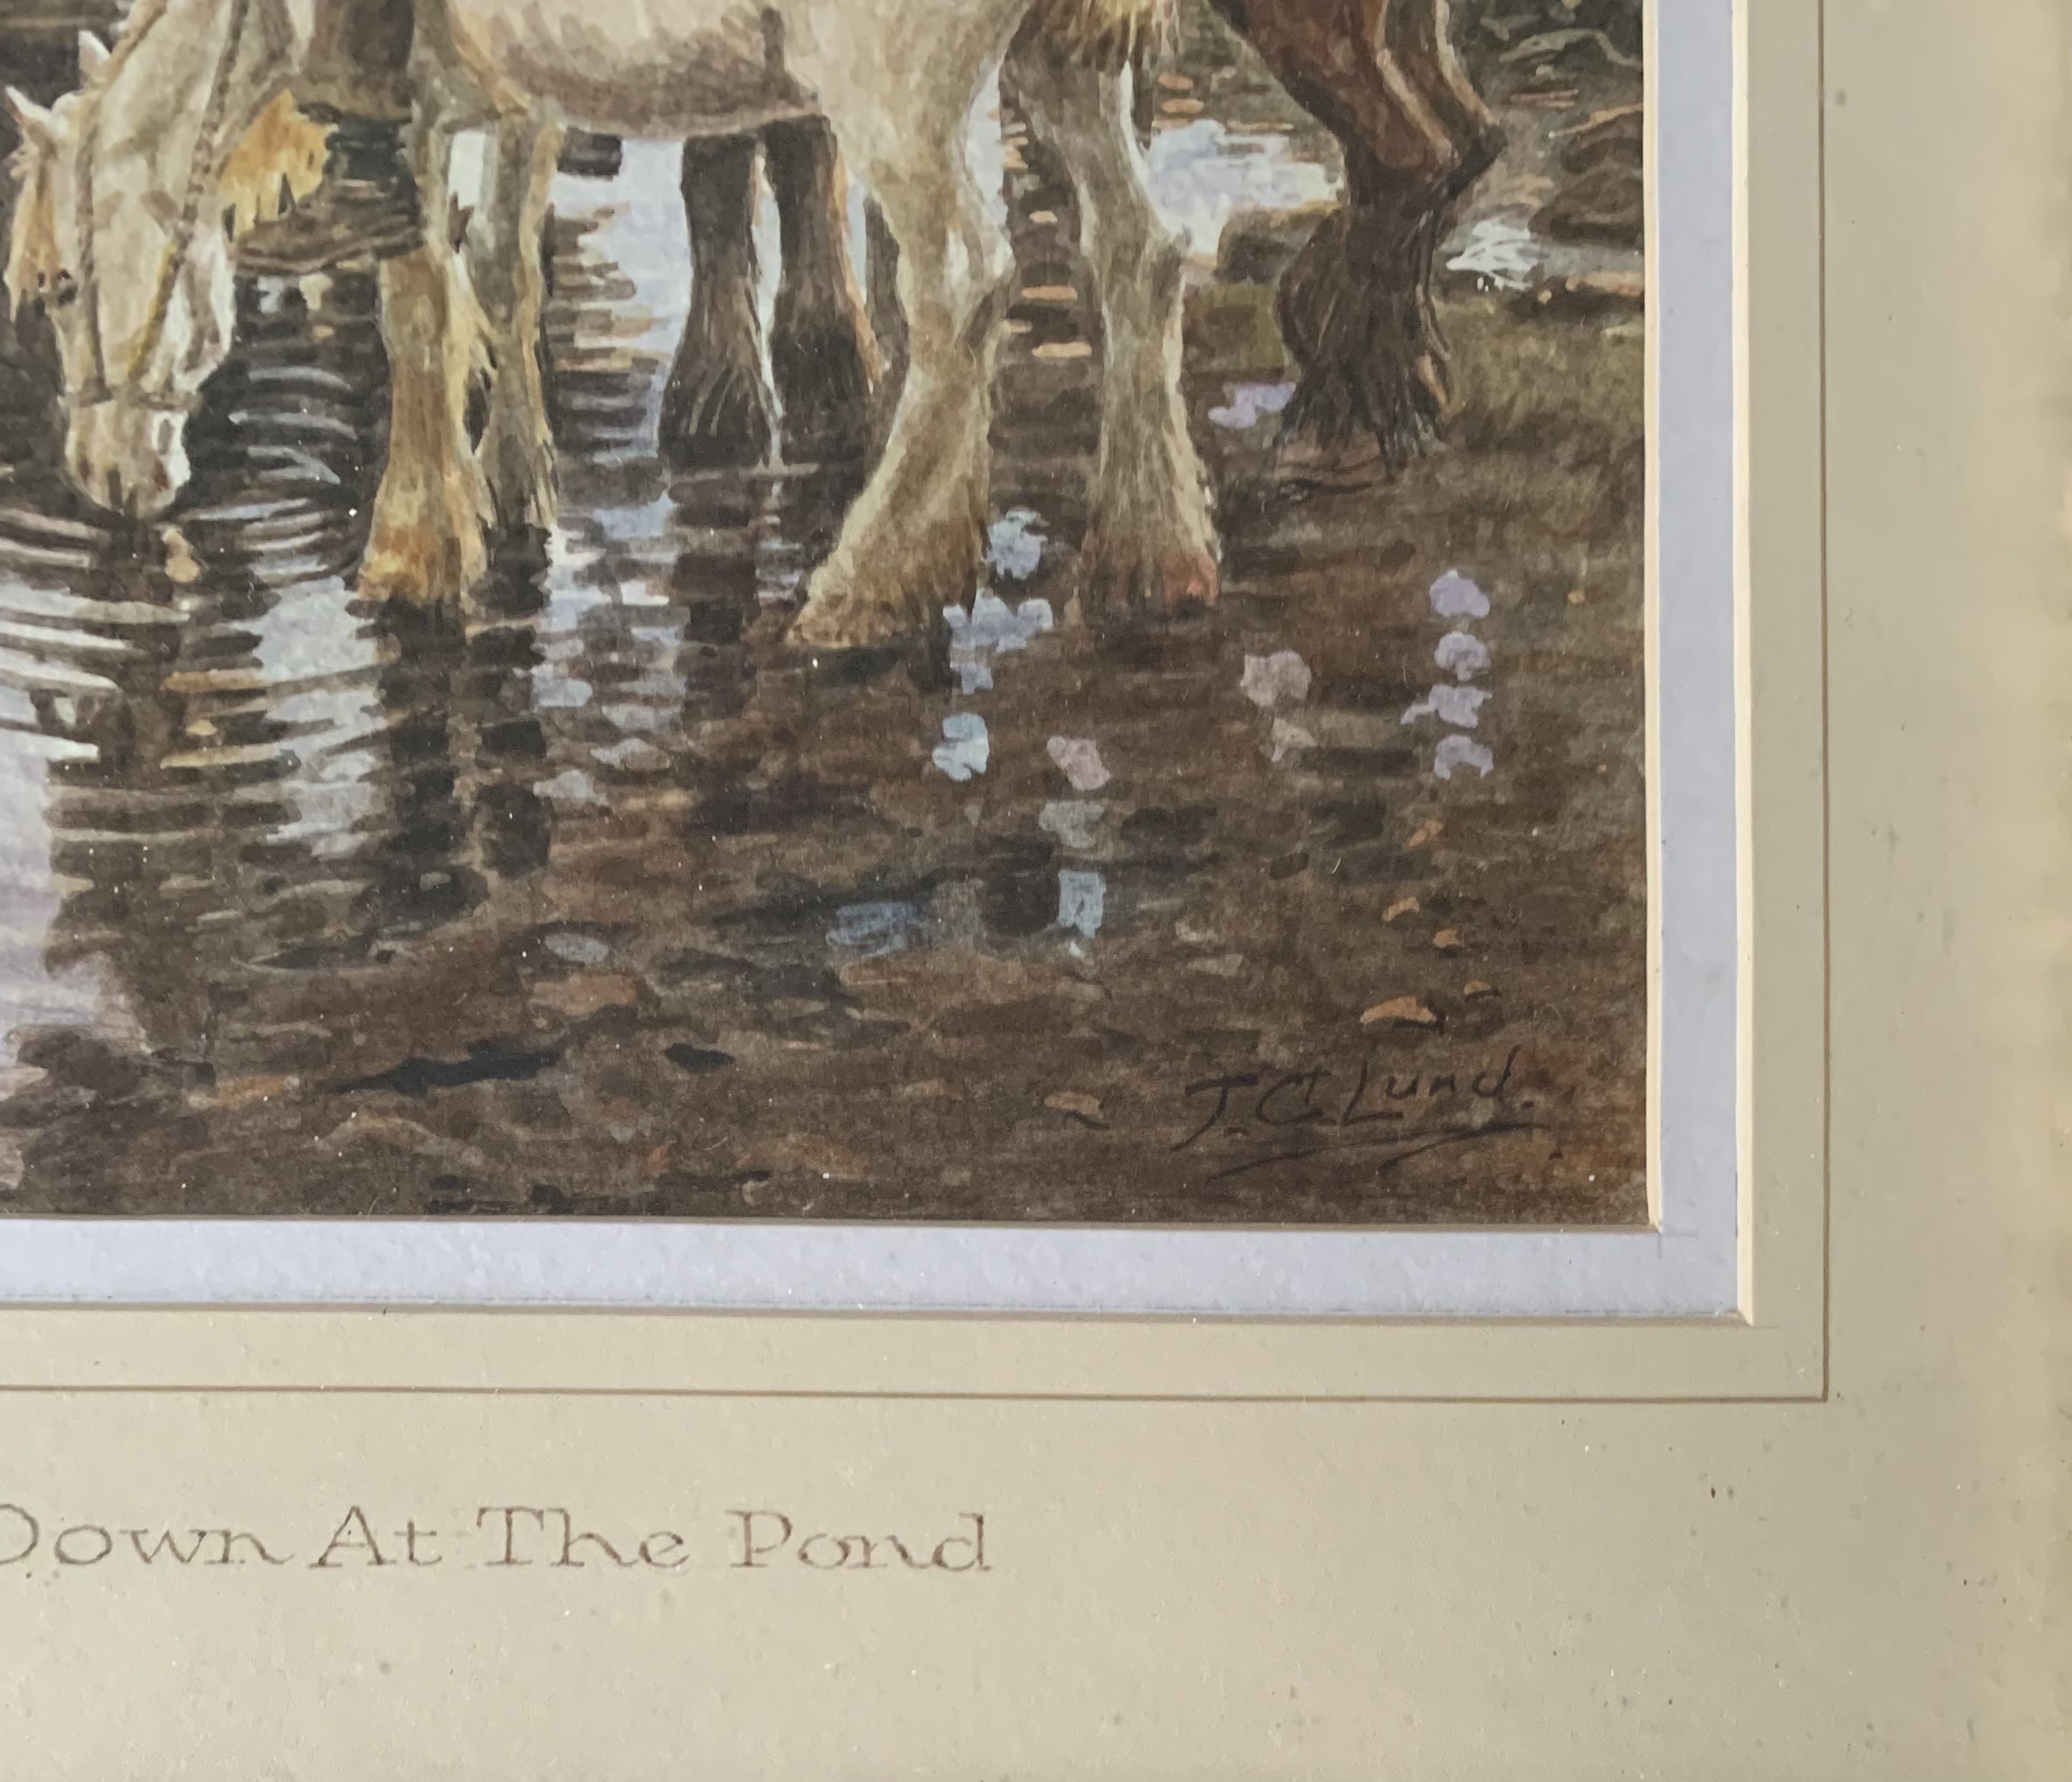 Watercolour ‘Down At The Pond’ signed by J. C. Lund. Image 7.5” x 9.5”, frame 14” x 17” - Image 2 of 2